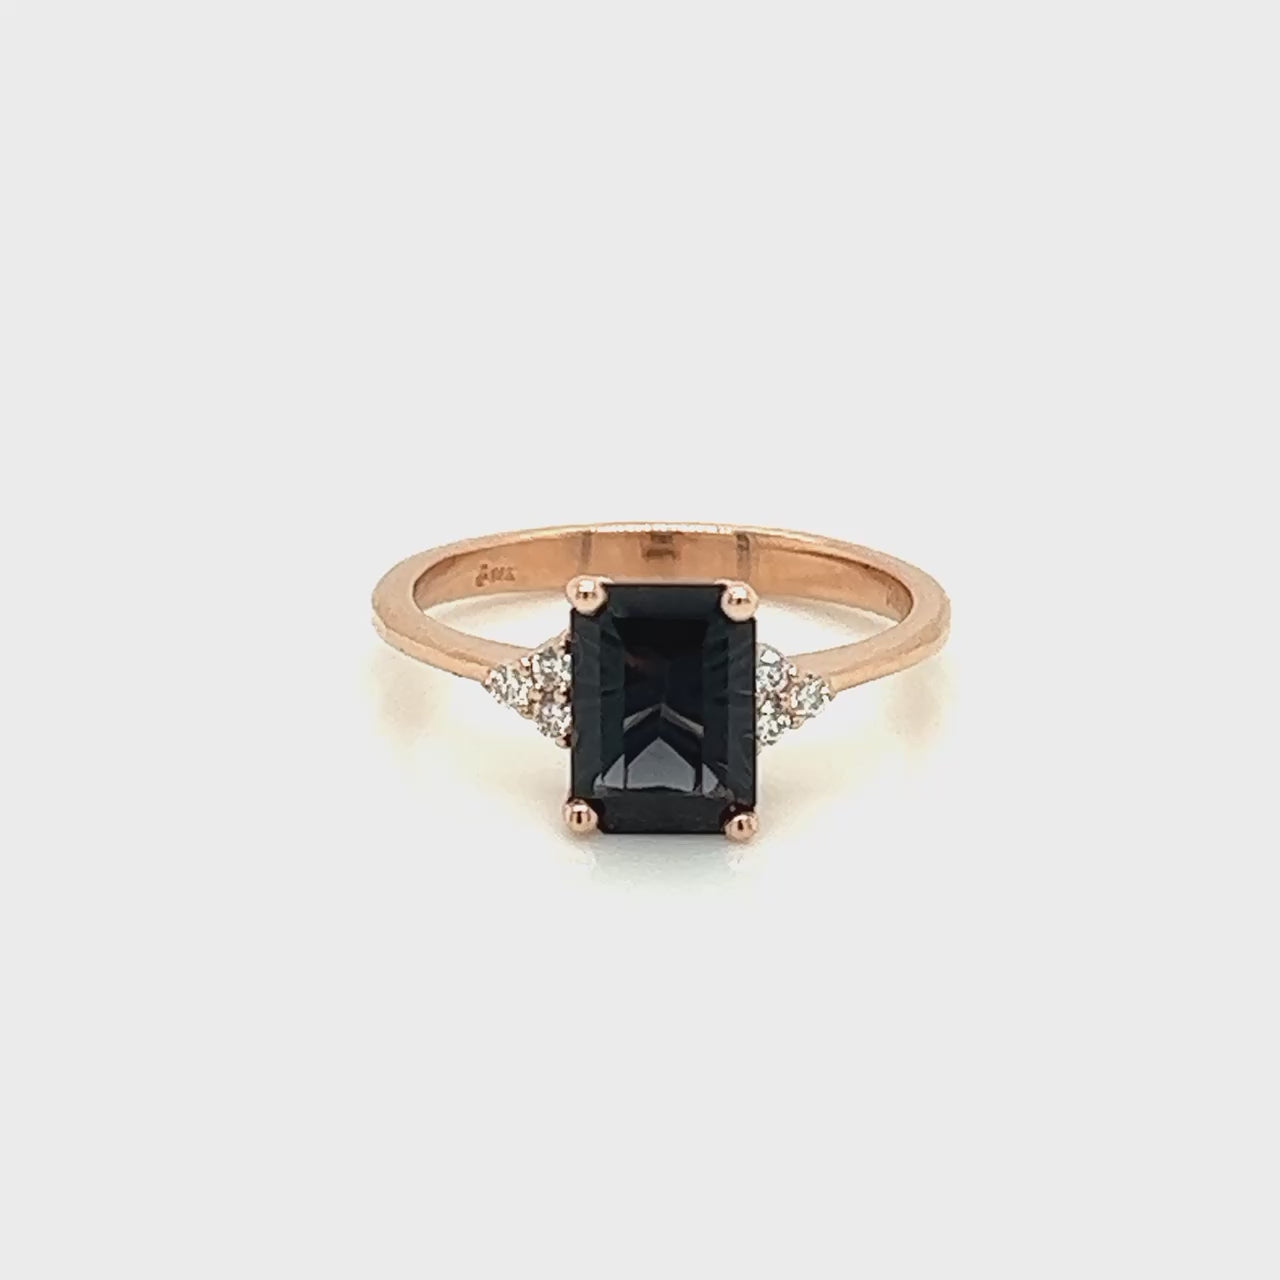 Imogene Ring with a 1.55 Carat Special Emerald Cut Spinel and White Accent Diamonds in 14k Rose Gold - Ready to Size and Ship